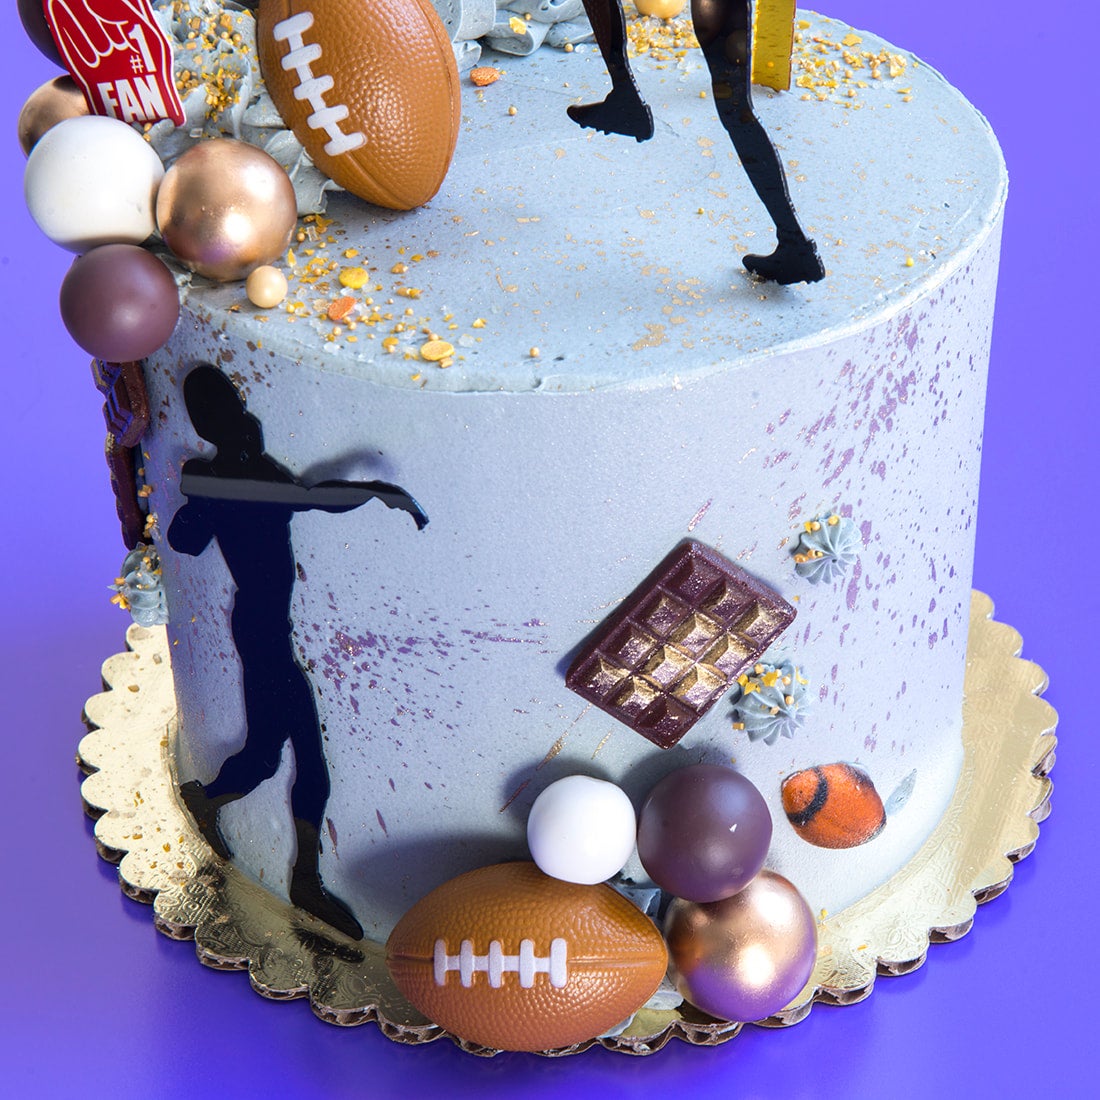 How to Make a Football Cake - Angie Holden The Country Chic Cottage